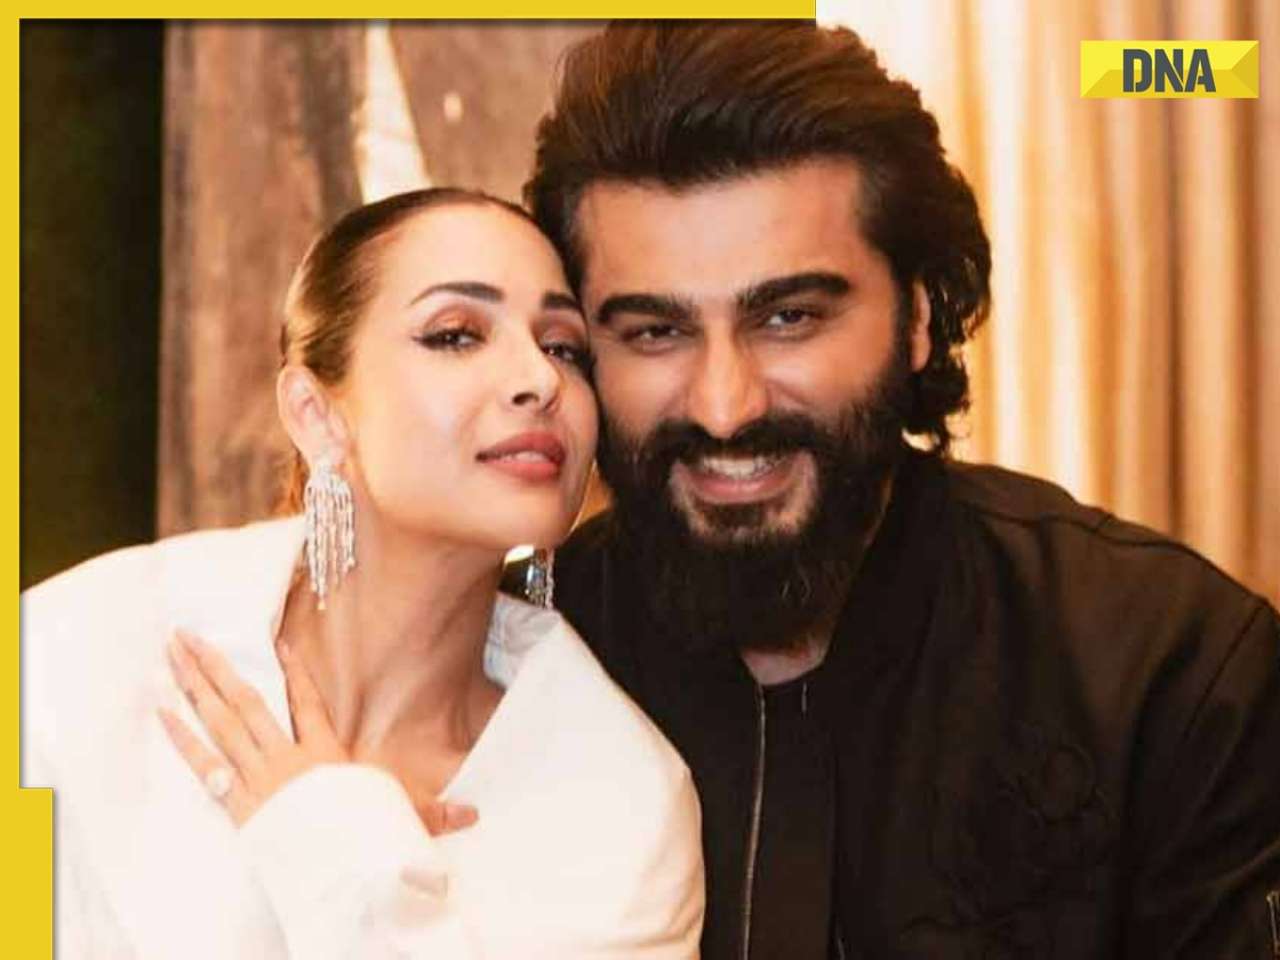 Malaika Arora shares cryptic post amid breakup rumours with Arjun Kapoor: 'When they say you can't...'